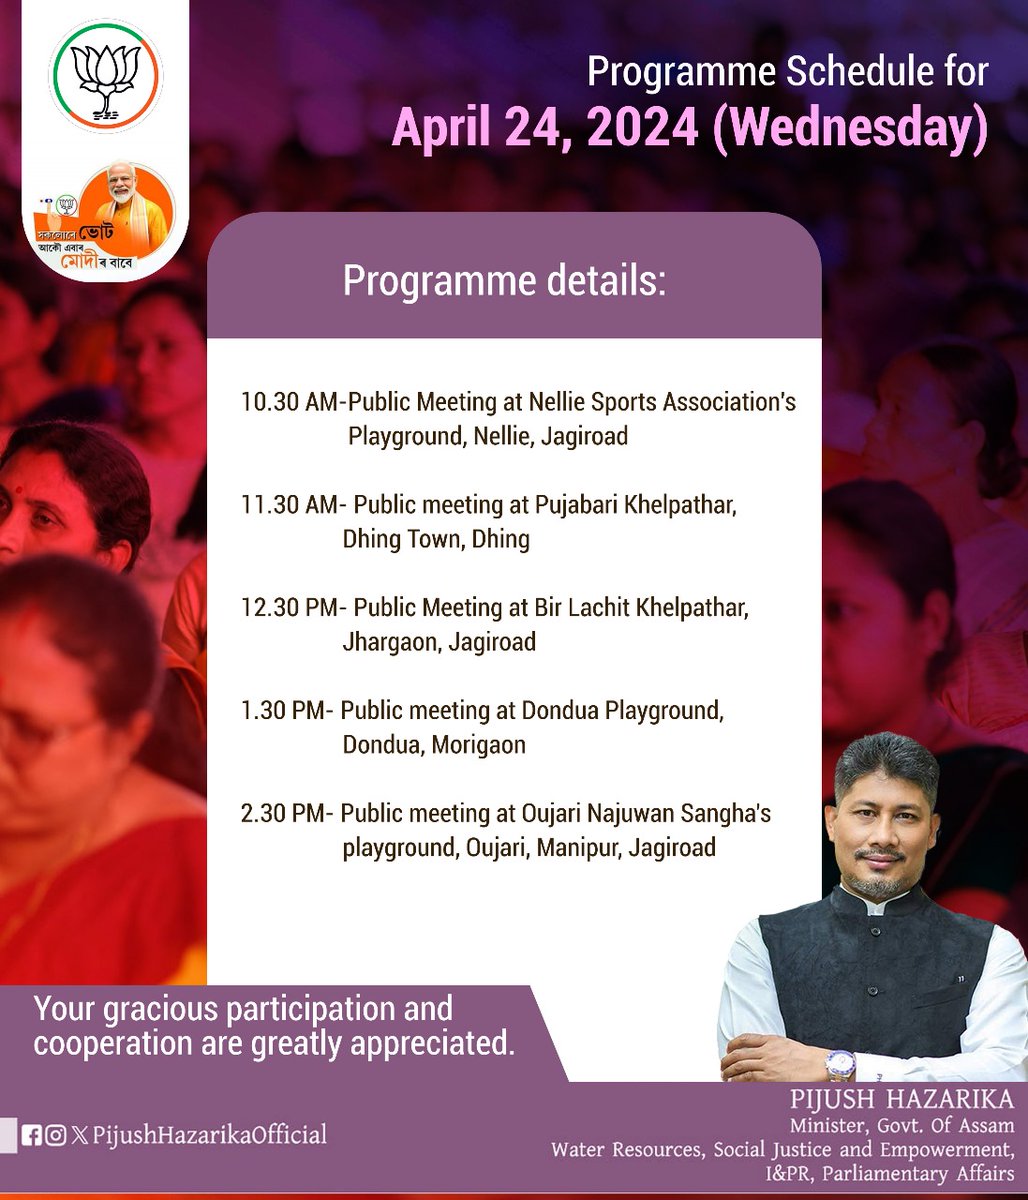 On the last day of phase-II campaign of #LokSabhaElections2024. I will be taking part at the public meetings in Dhing and my home constituency Jagiroad. #AssamCampaign2024 #AbkiBaar400Paar #PhirEKBarModiSarkar